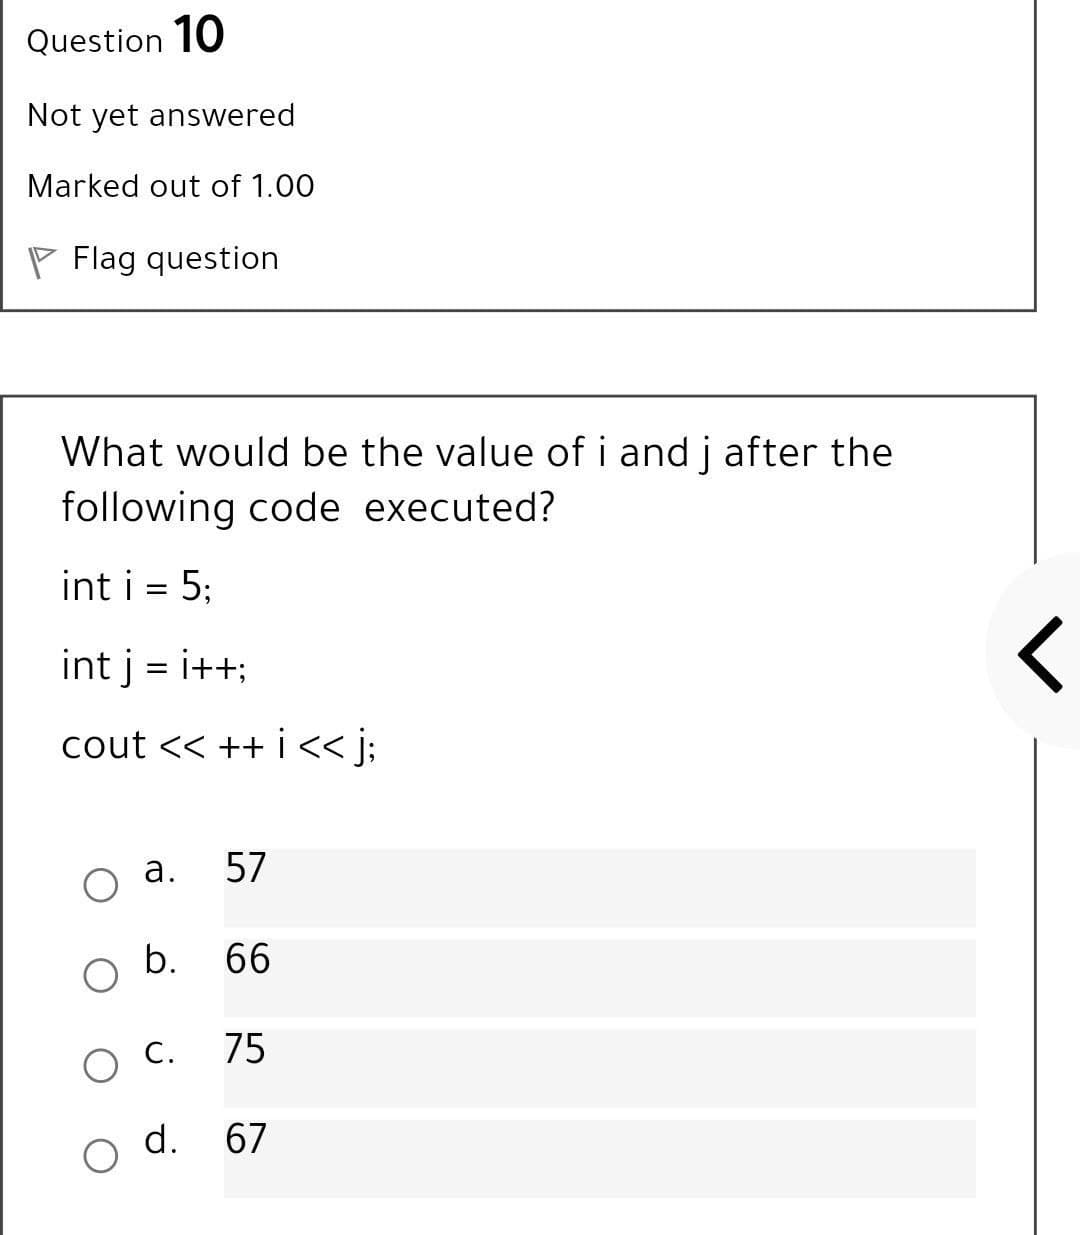 Question 10
Not yet answered
Marked out of 1.00
P Flag question
What would be the value of i and j after the
following code executed?
int i = 5;
int j = i++;
cout << ++ i < j;
а.
57
b. 66
С.
75
d.
67
